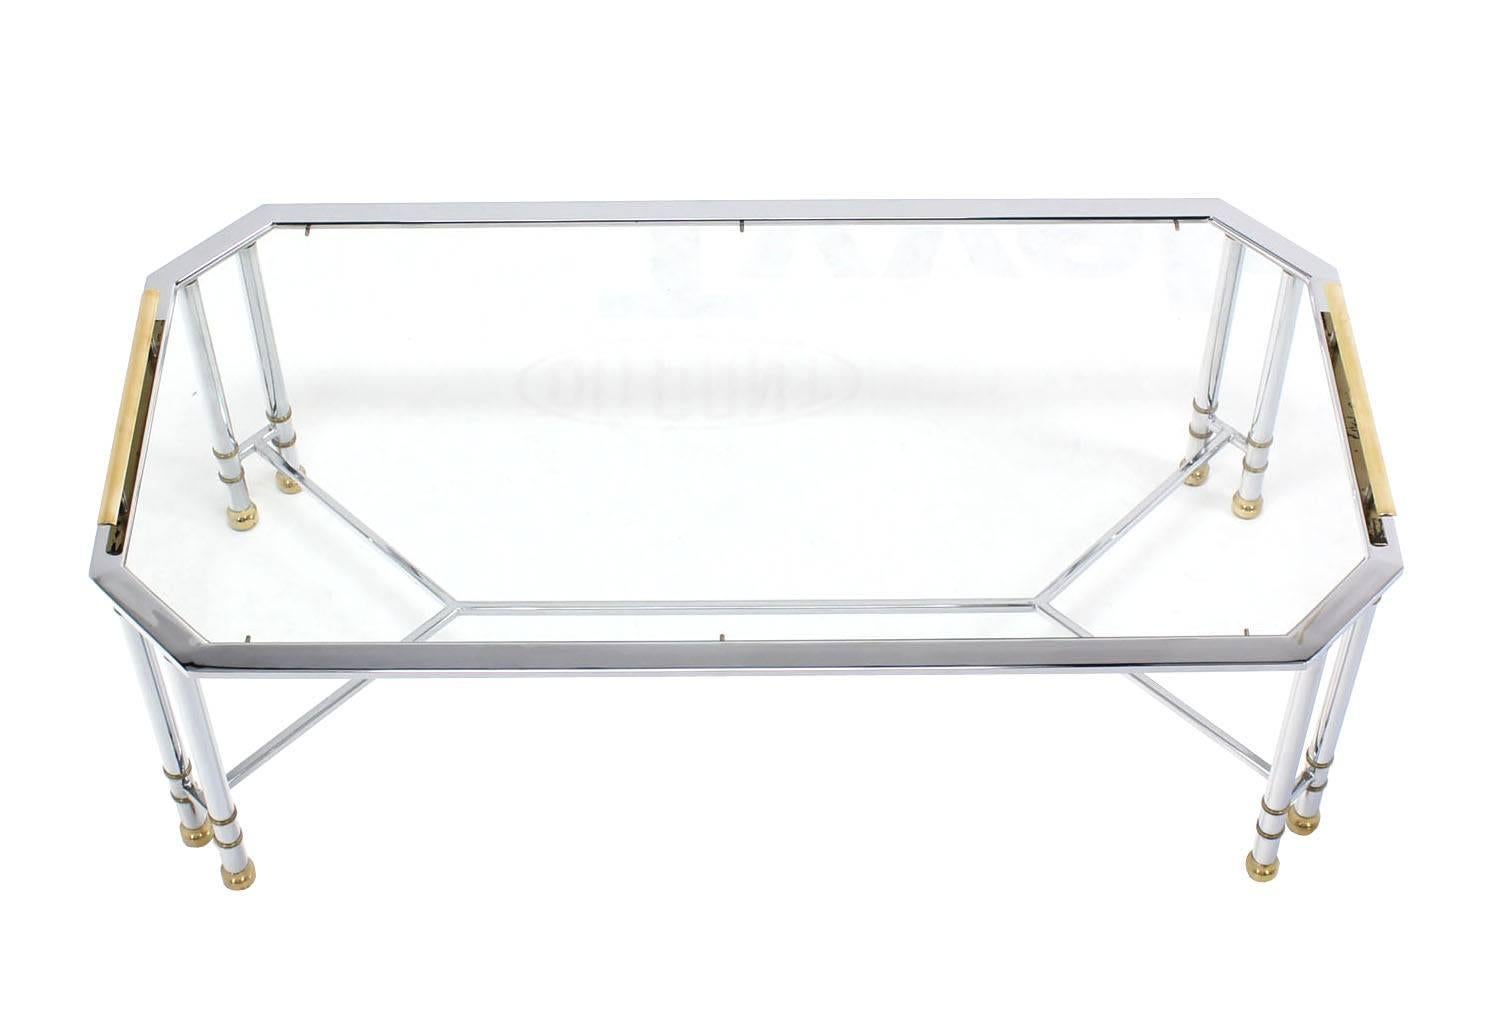 Rectangular Chrome Brass Glass Coffee Table Tray Style Mid Century Modern In Excellent Condition For Sale In Rockaway, NJ